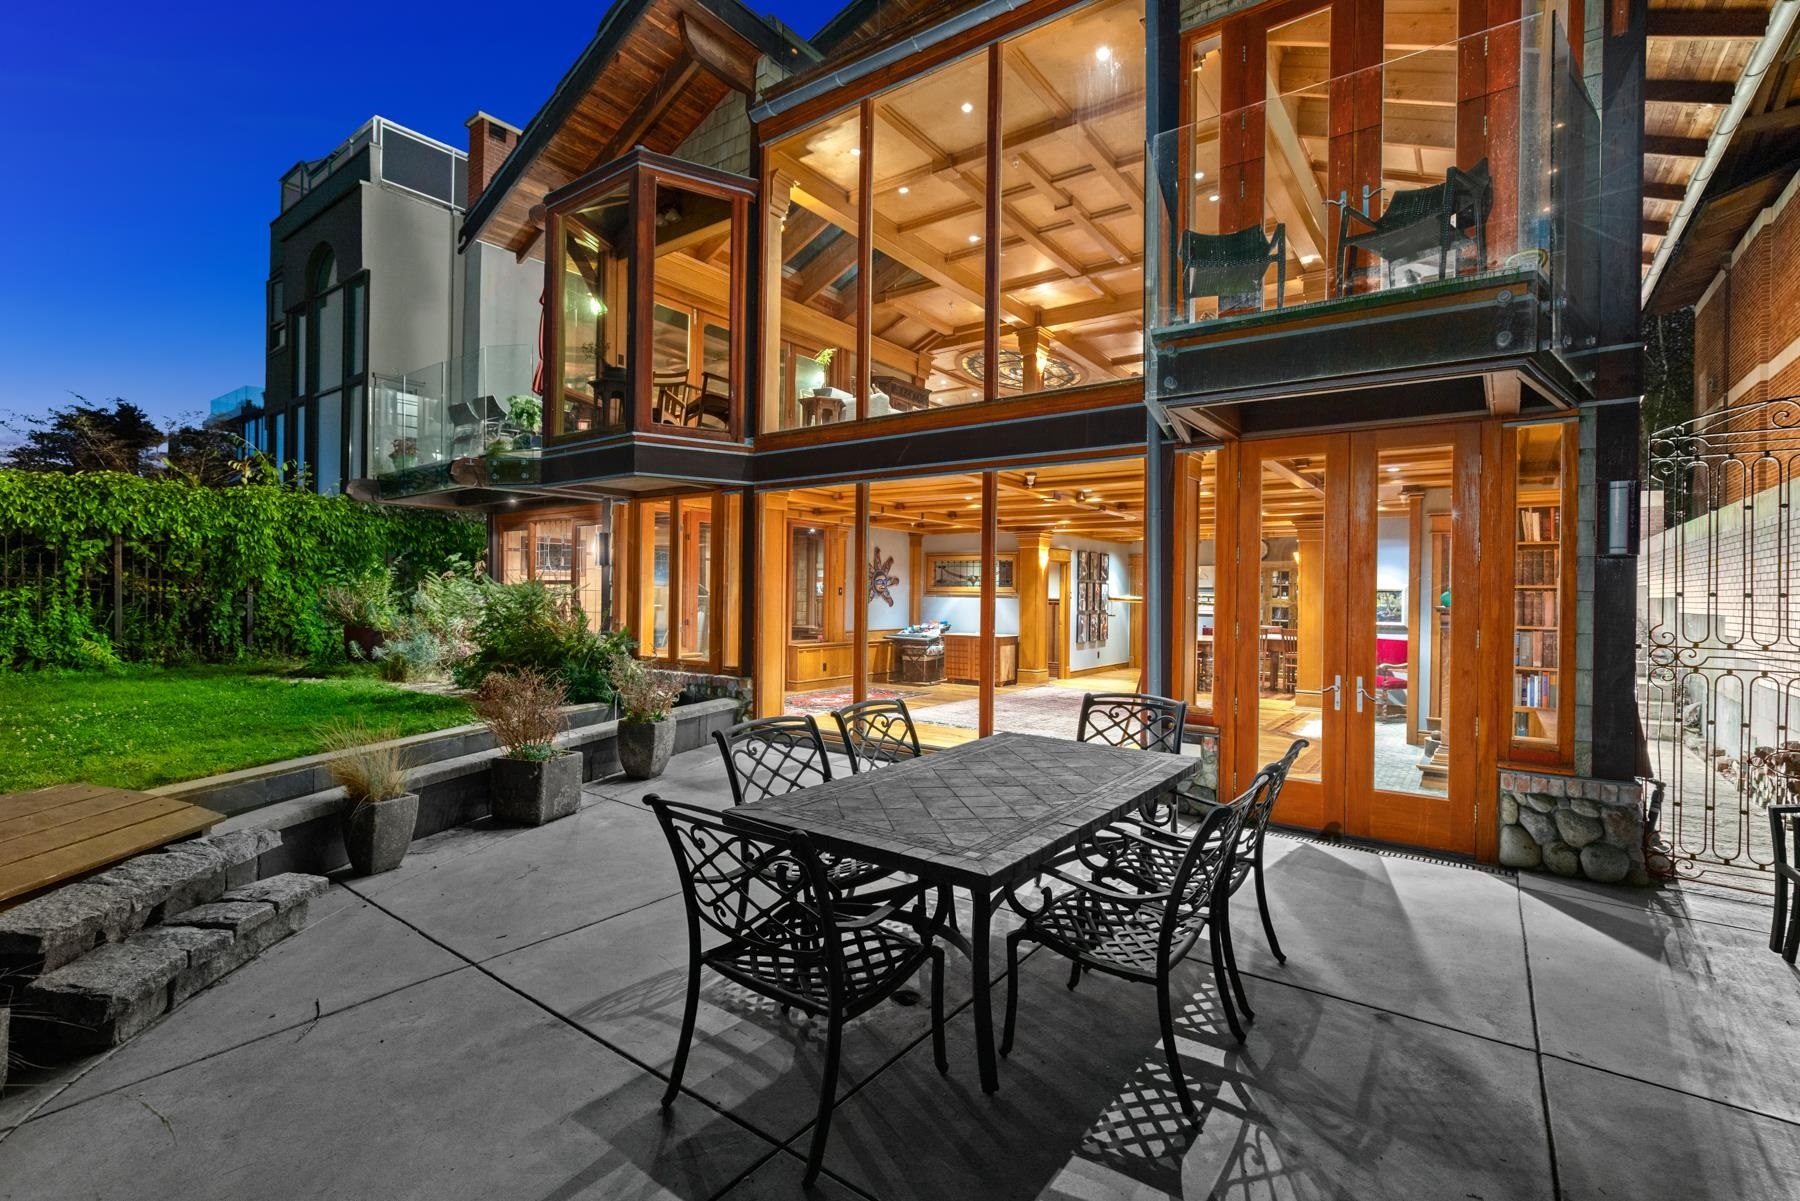 2495 POINT GREY ROAD : [17]